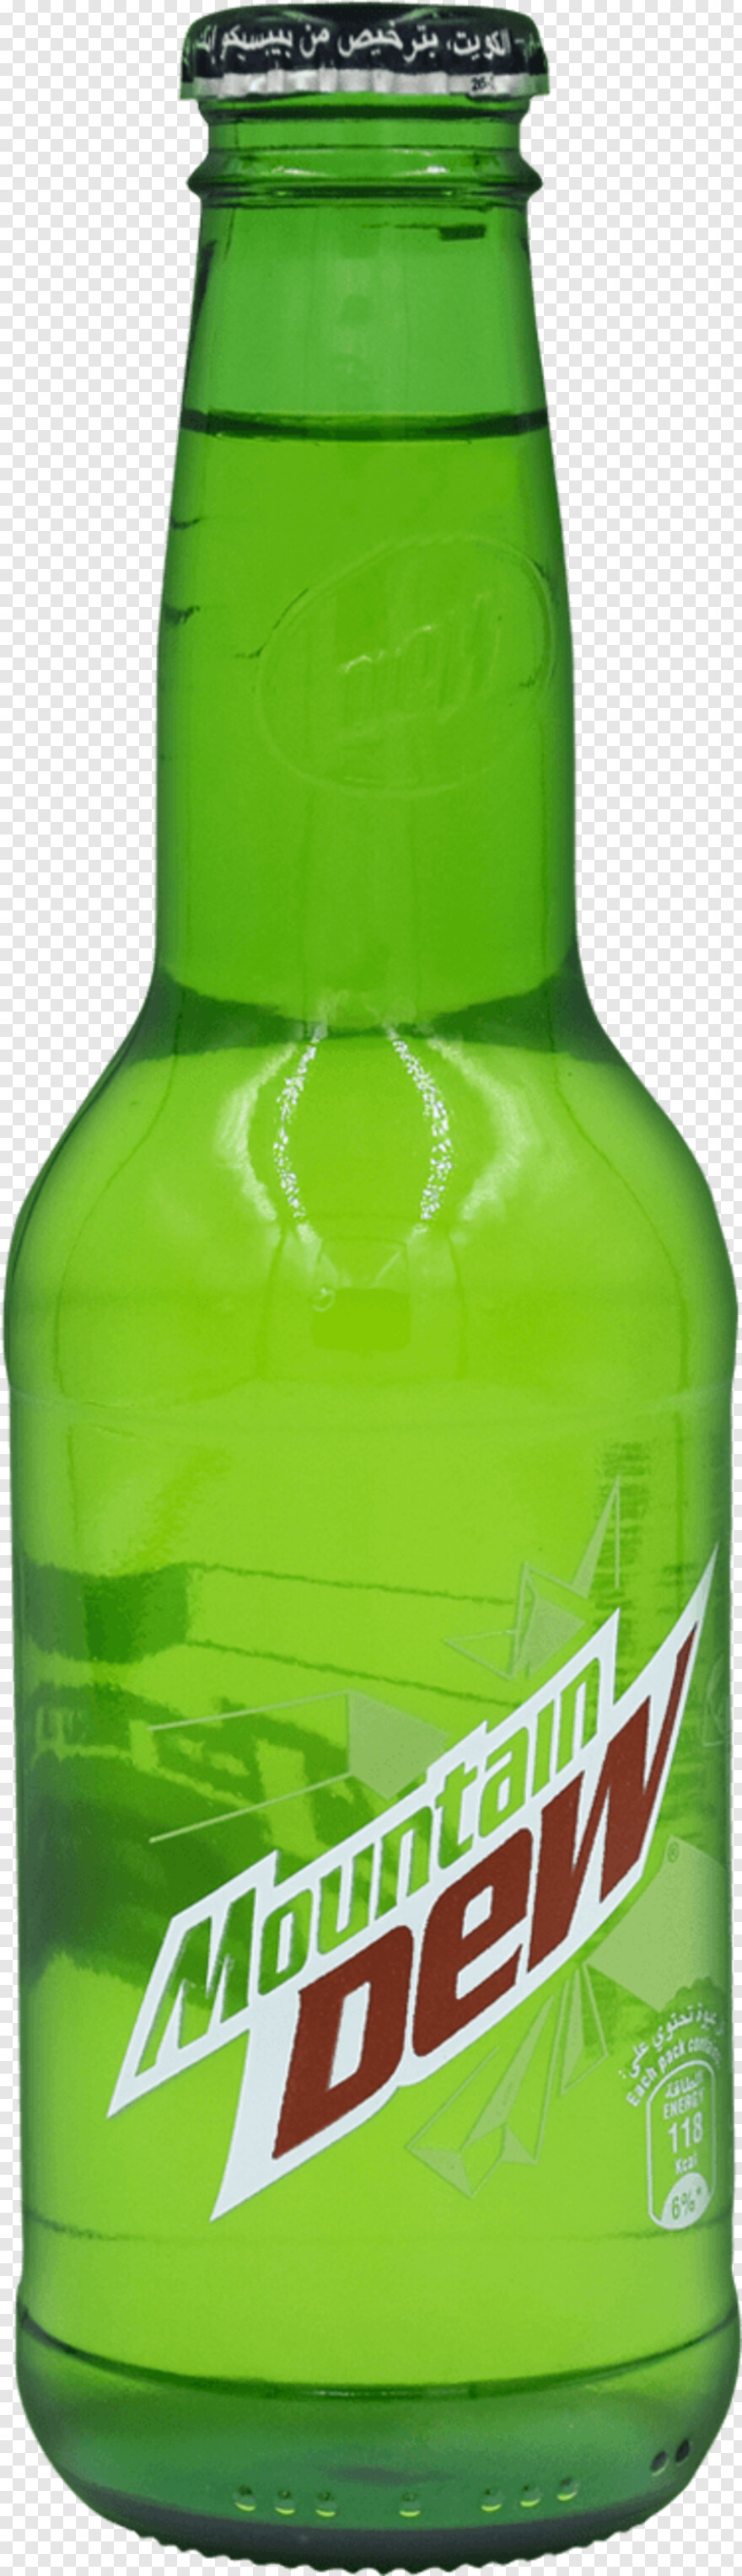 mountain-dew-can # 380651